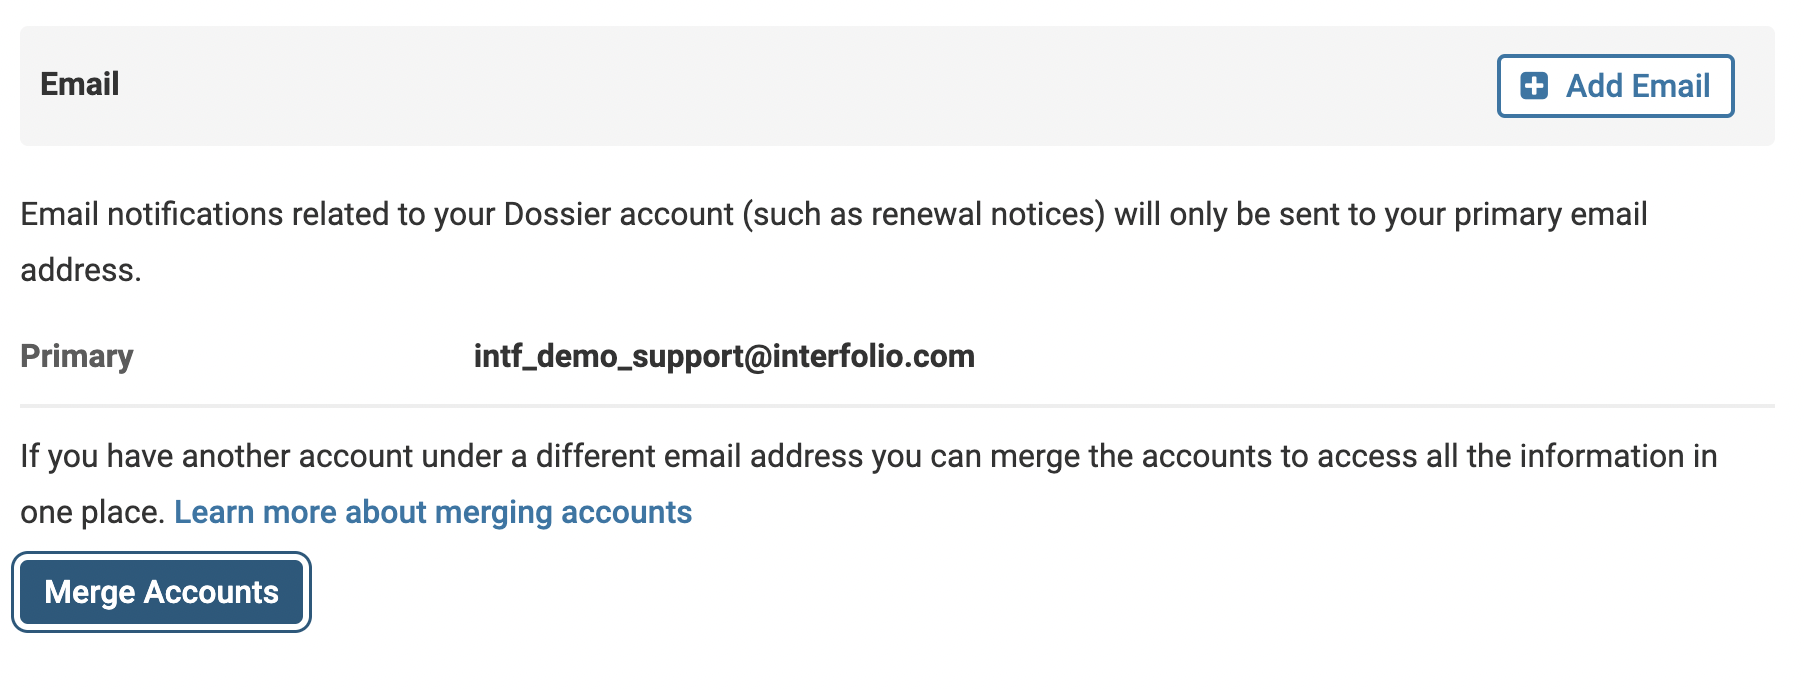 Merge Accounts button selected